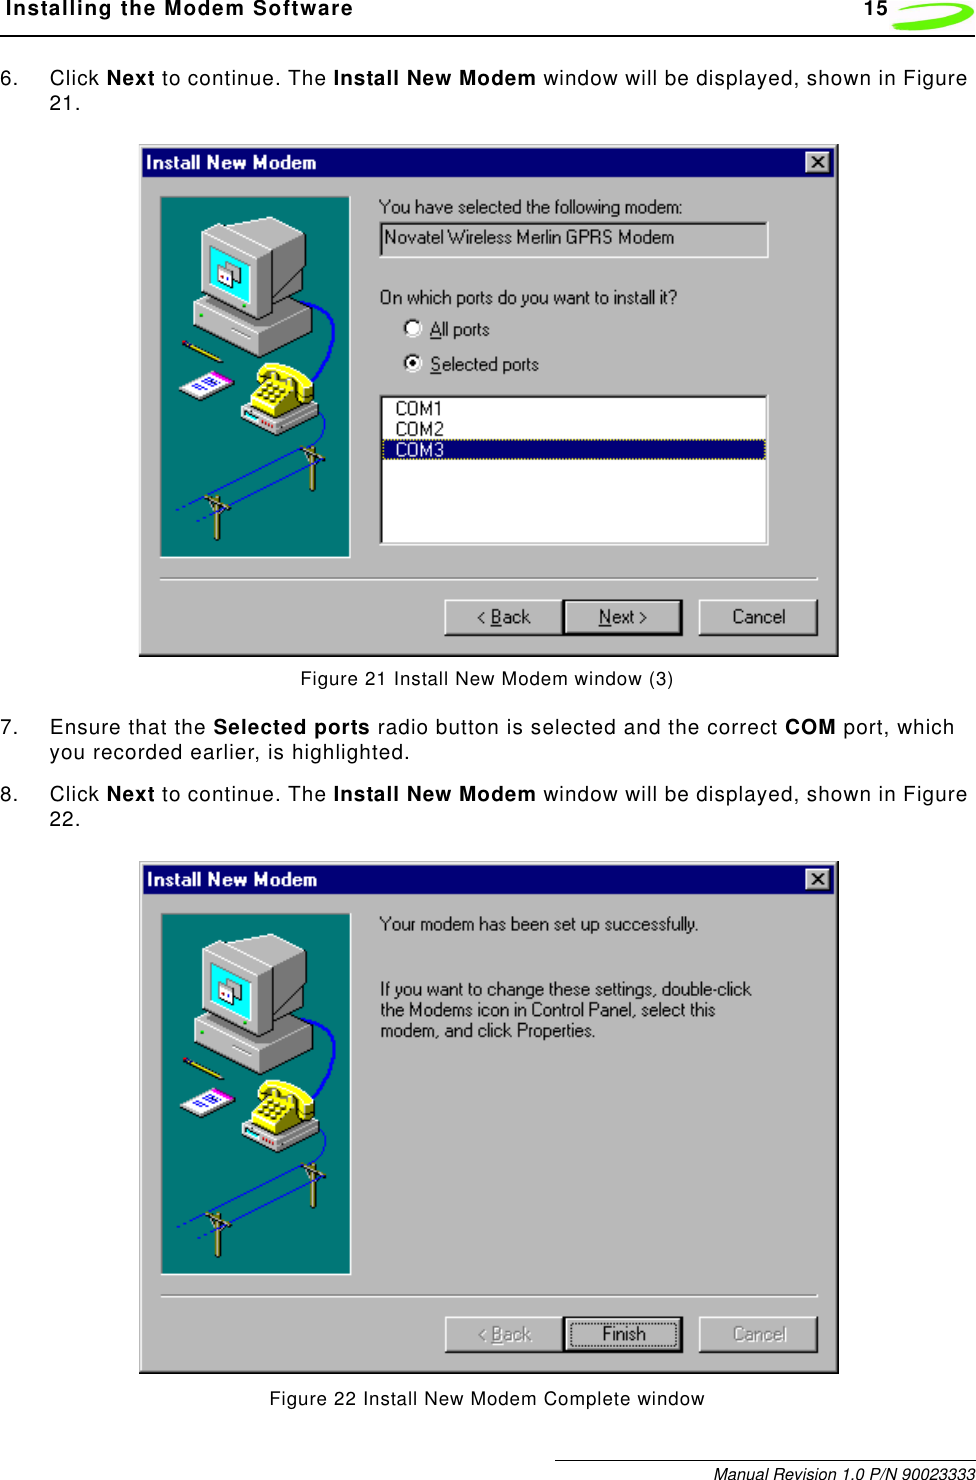  Installing the Modem Software 15Manual Revision 1.0 P/N 900233336. Click Next to continue. The Install New Modem window will be displayed, shown in Figure 21.Figure 21 Install New Modem window (3)7. Ensure that the Selected ports radio button is selected and the correct COM port, which you recorded earlier, is highlighted.8. Click Next to continue. The Install New Modem window will be displayed, shown in Figure 22.Figure 22 Install New Modem Complete window